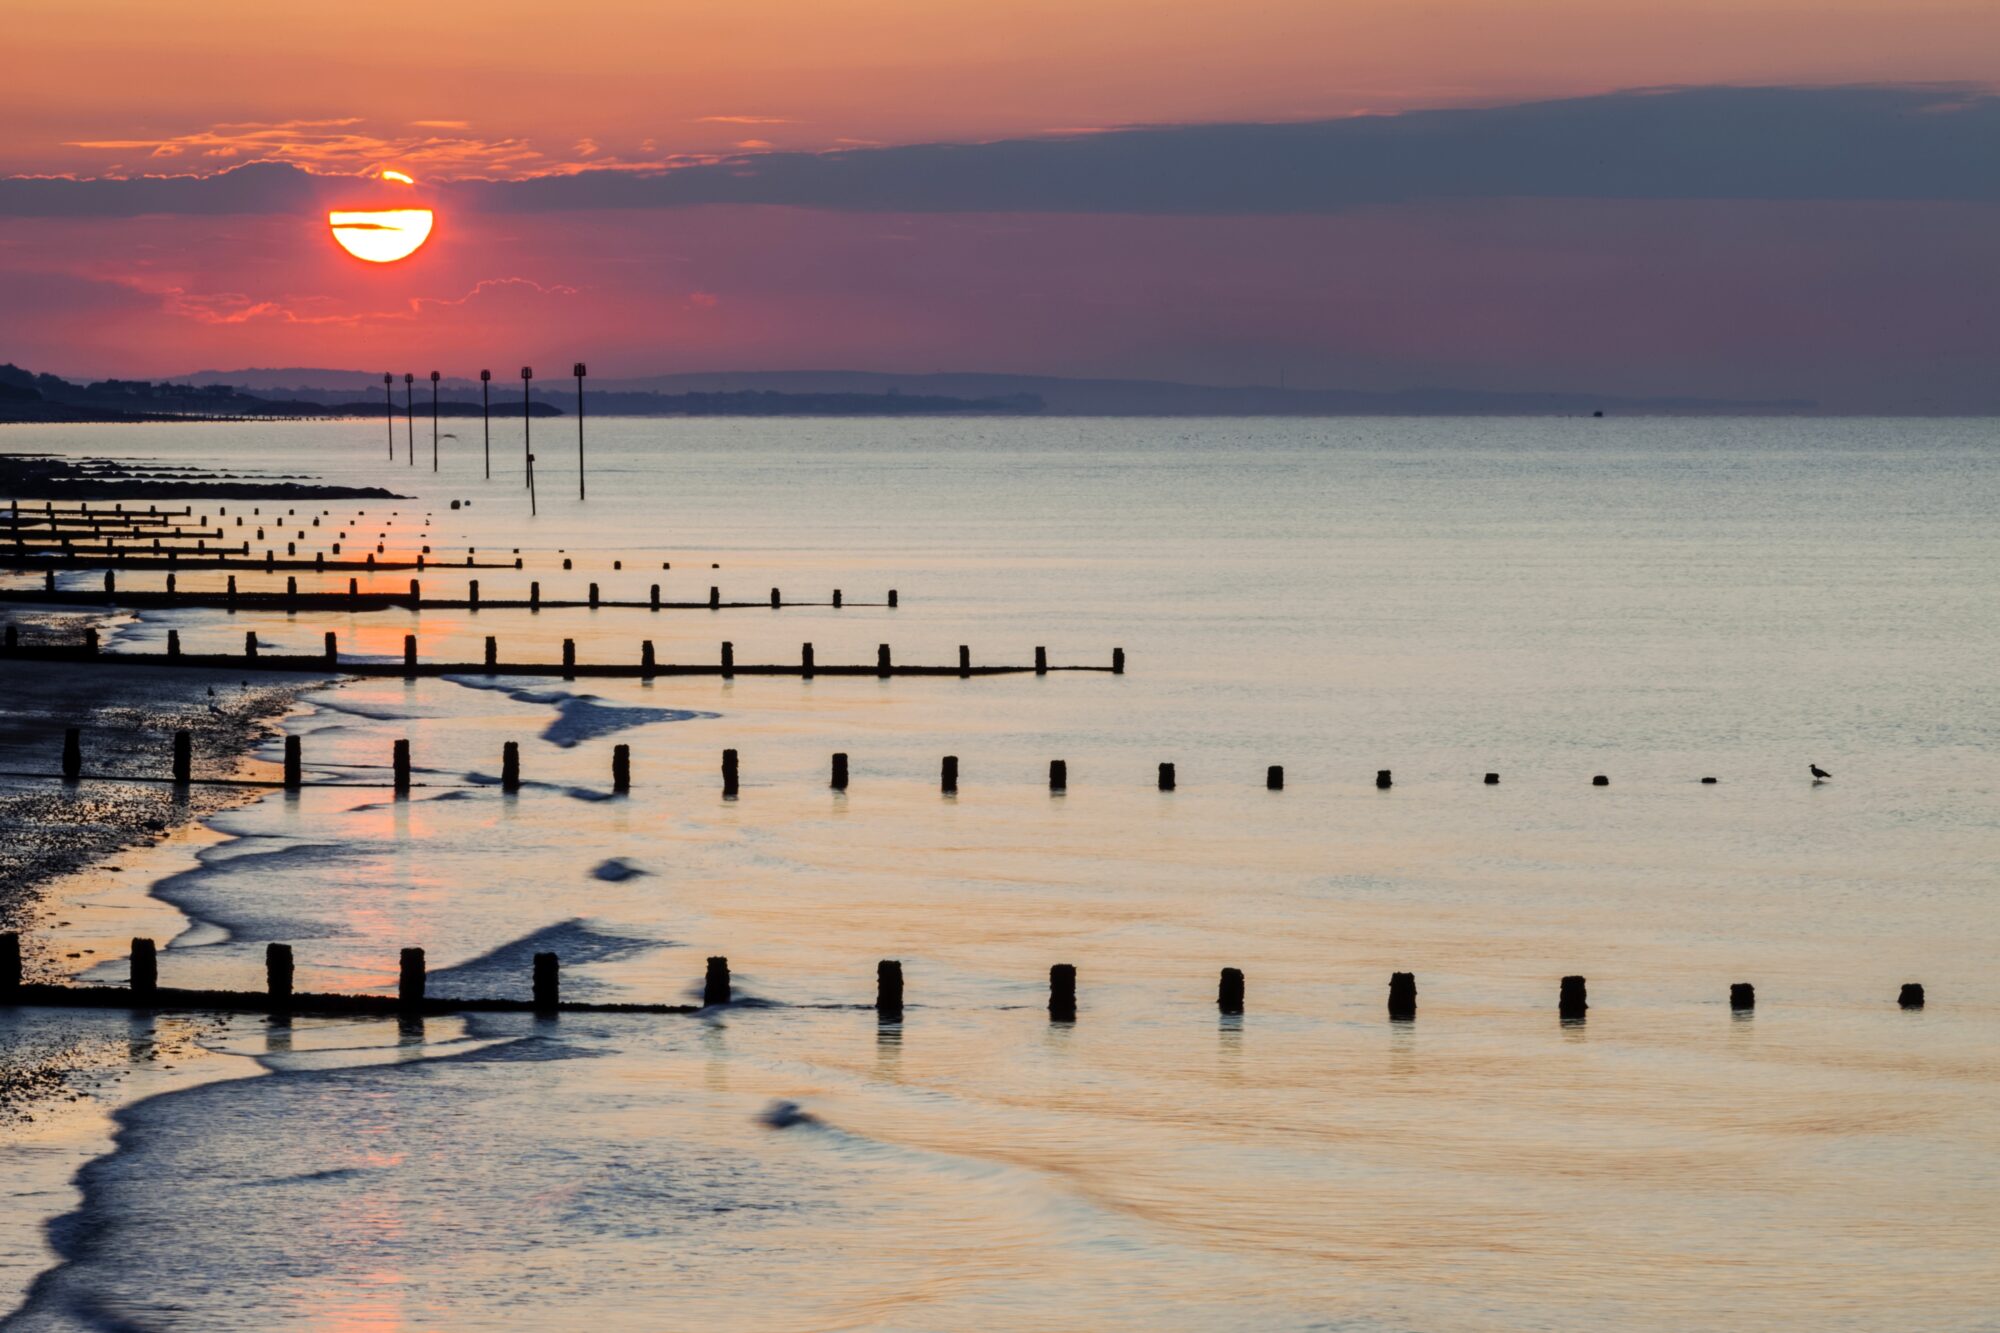 A glowing red sunrise through purple and orange clouds, over a still seascape and coastline emerging from the left with wooden groynes stretching out into the sea in perpendicular lines along the whole coast, silhouetted by the sunrise